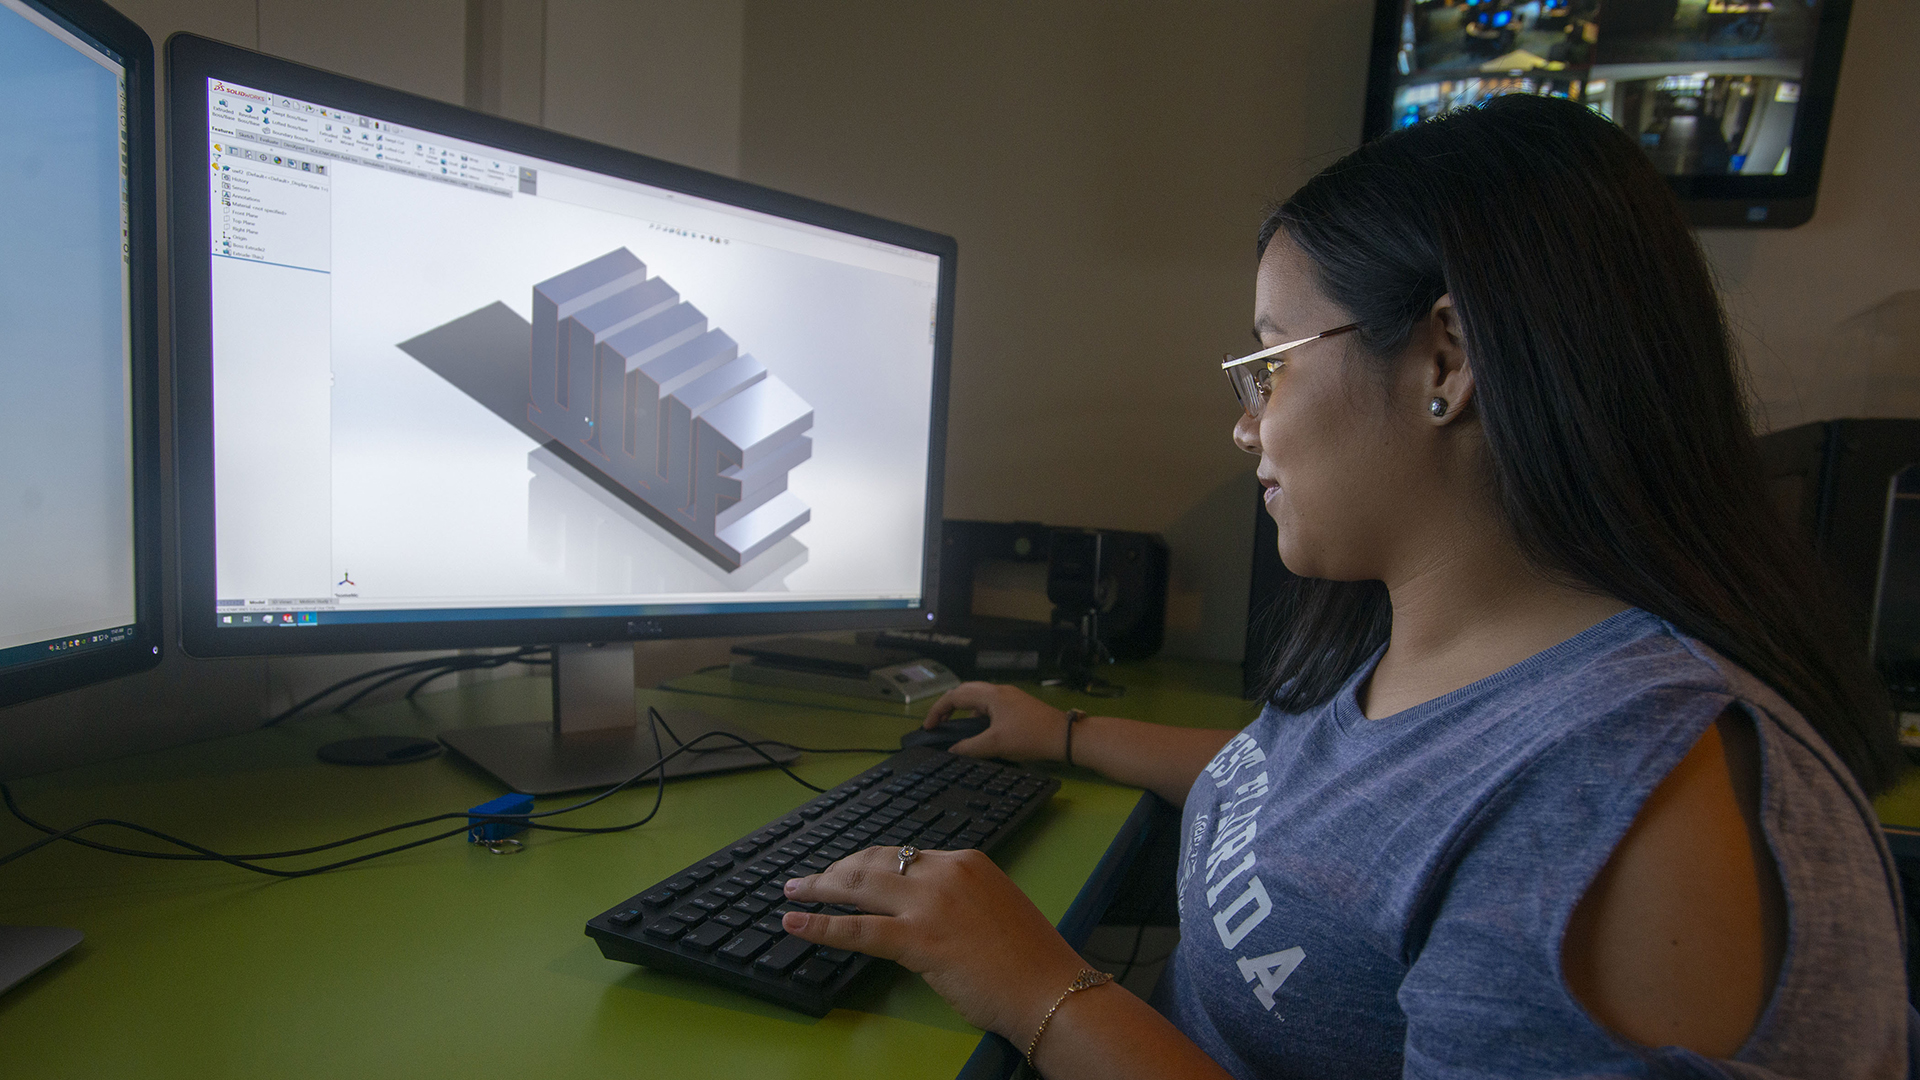 Student using a library computer to design a 3D object.